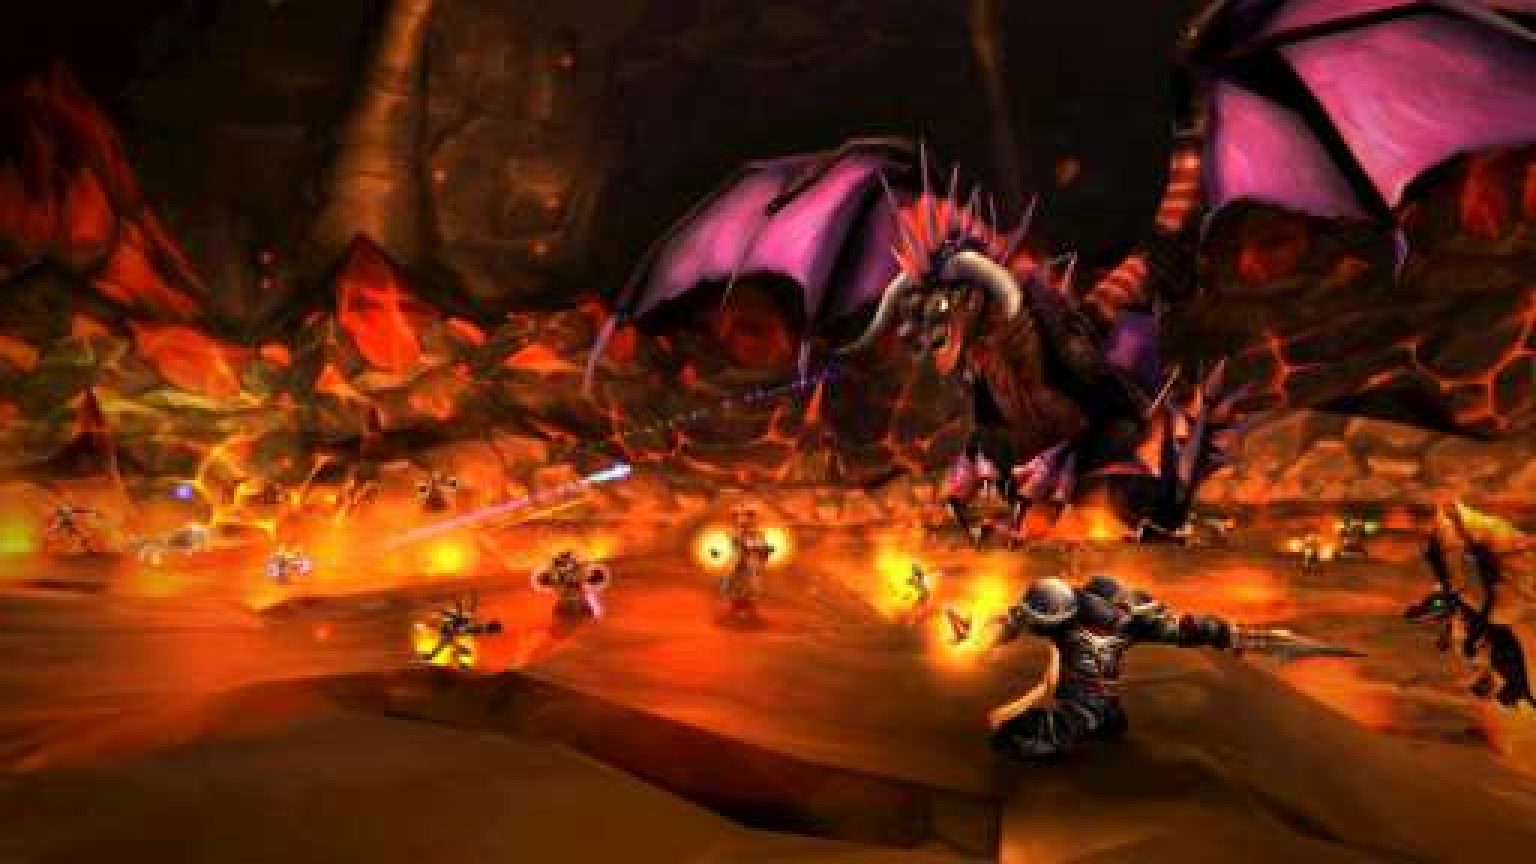 world of warcraft free download full game for pc